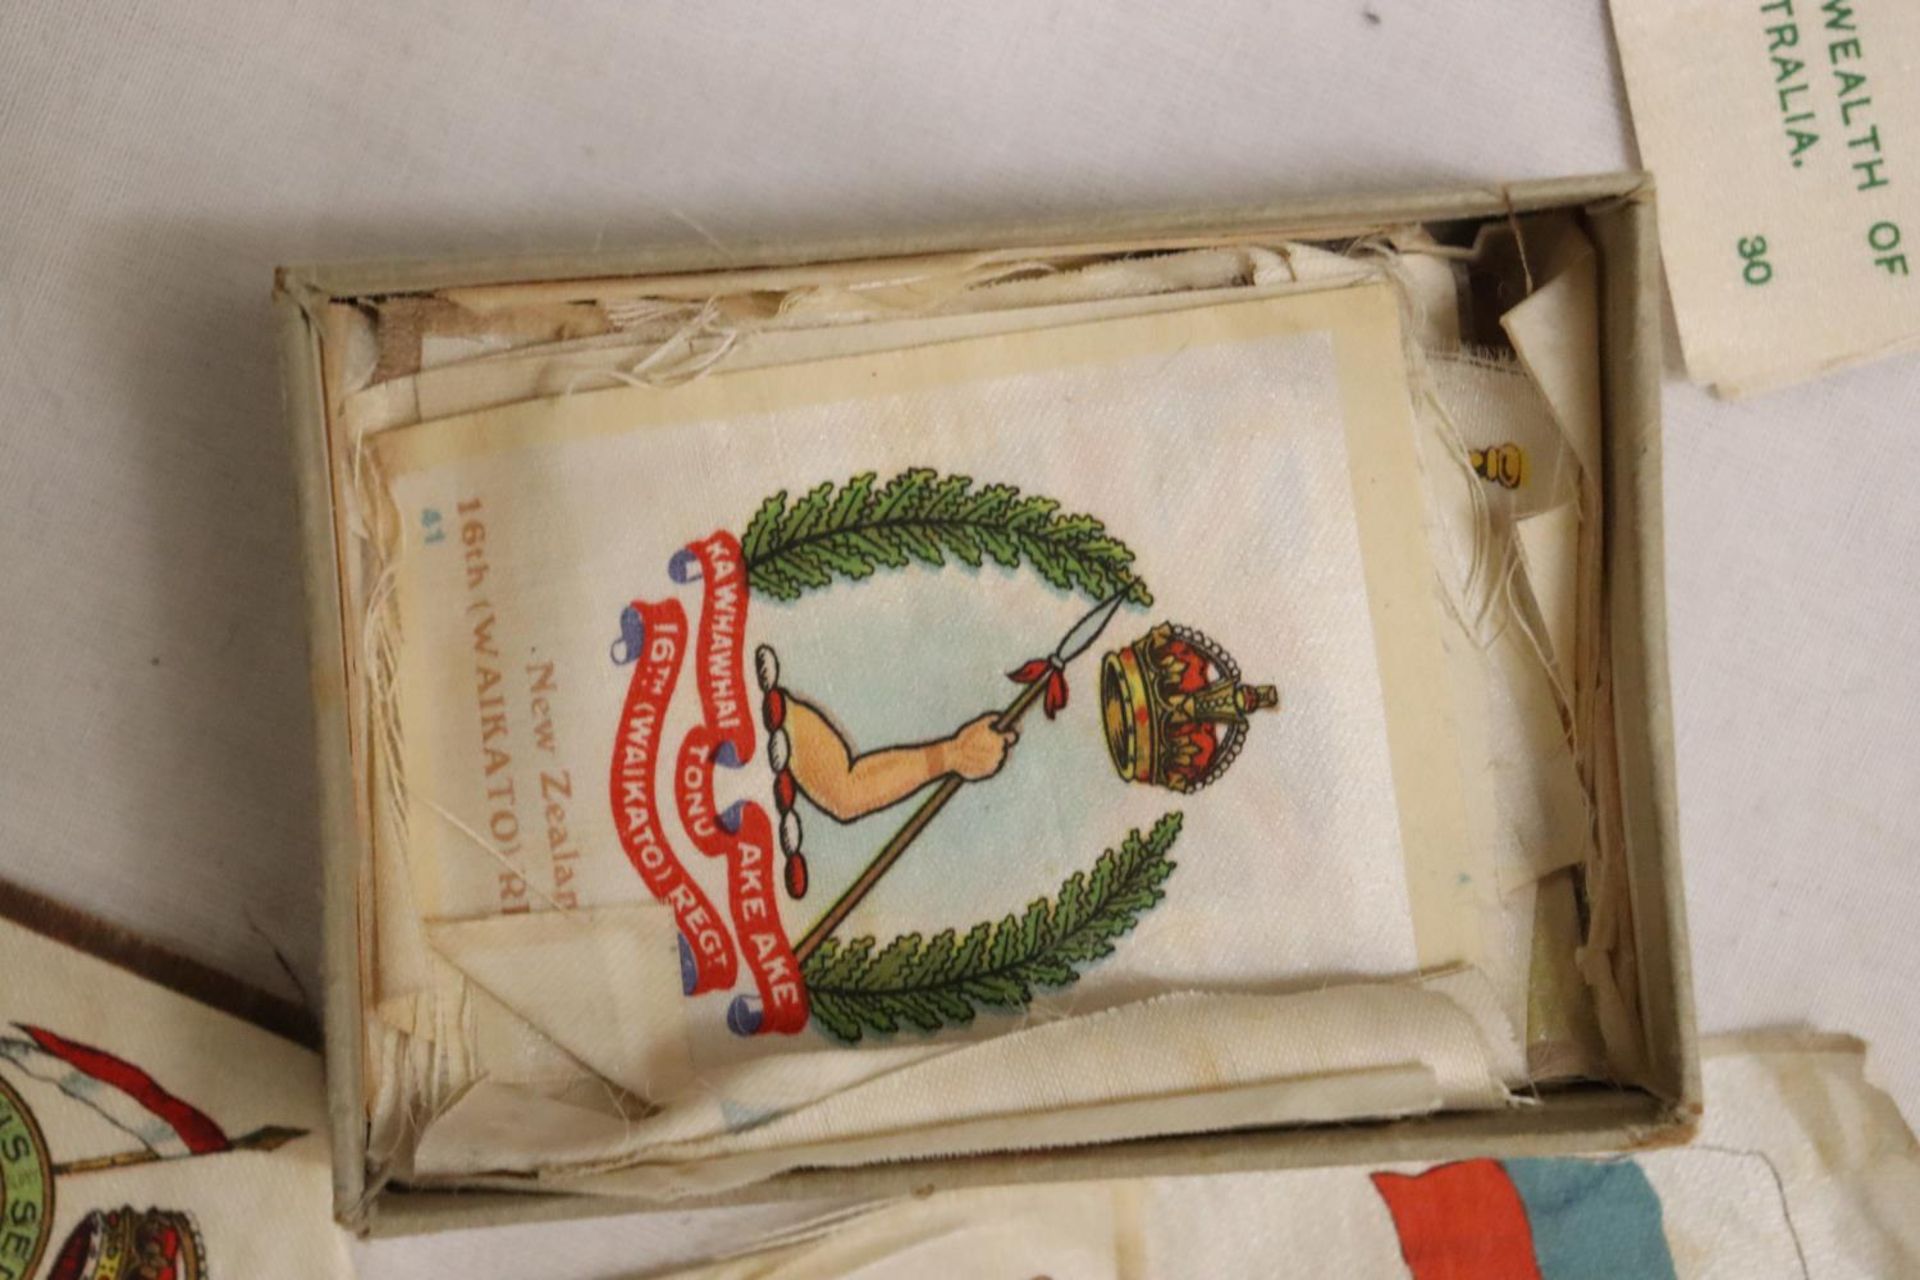 A BOX OF MURATTI CIGARETTES SILK CARDS CIRCA 1914, THE SILKS BEING FLAGS OF THE WORLD - Image 3 of 5